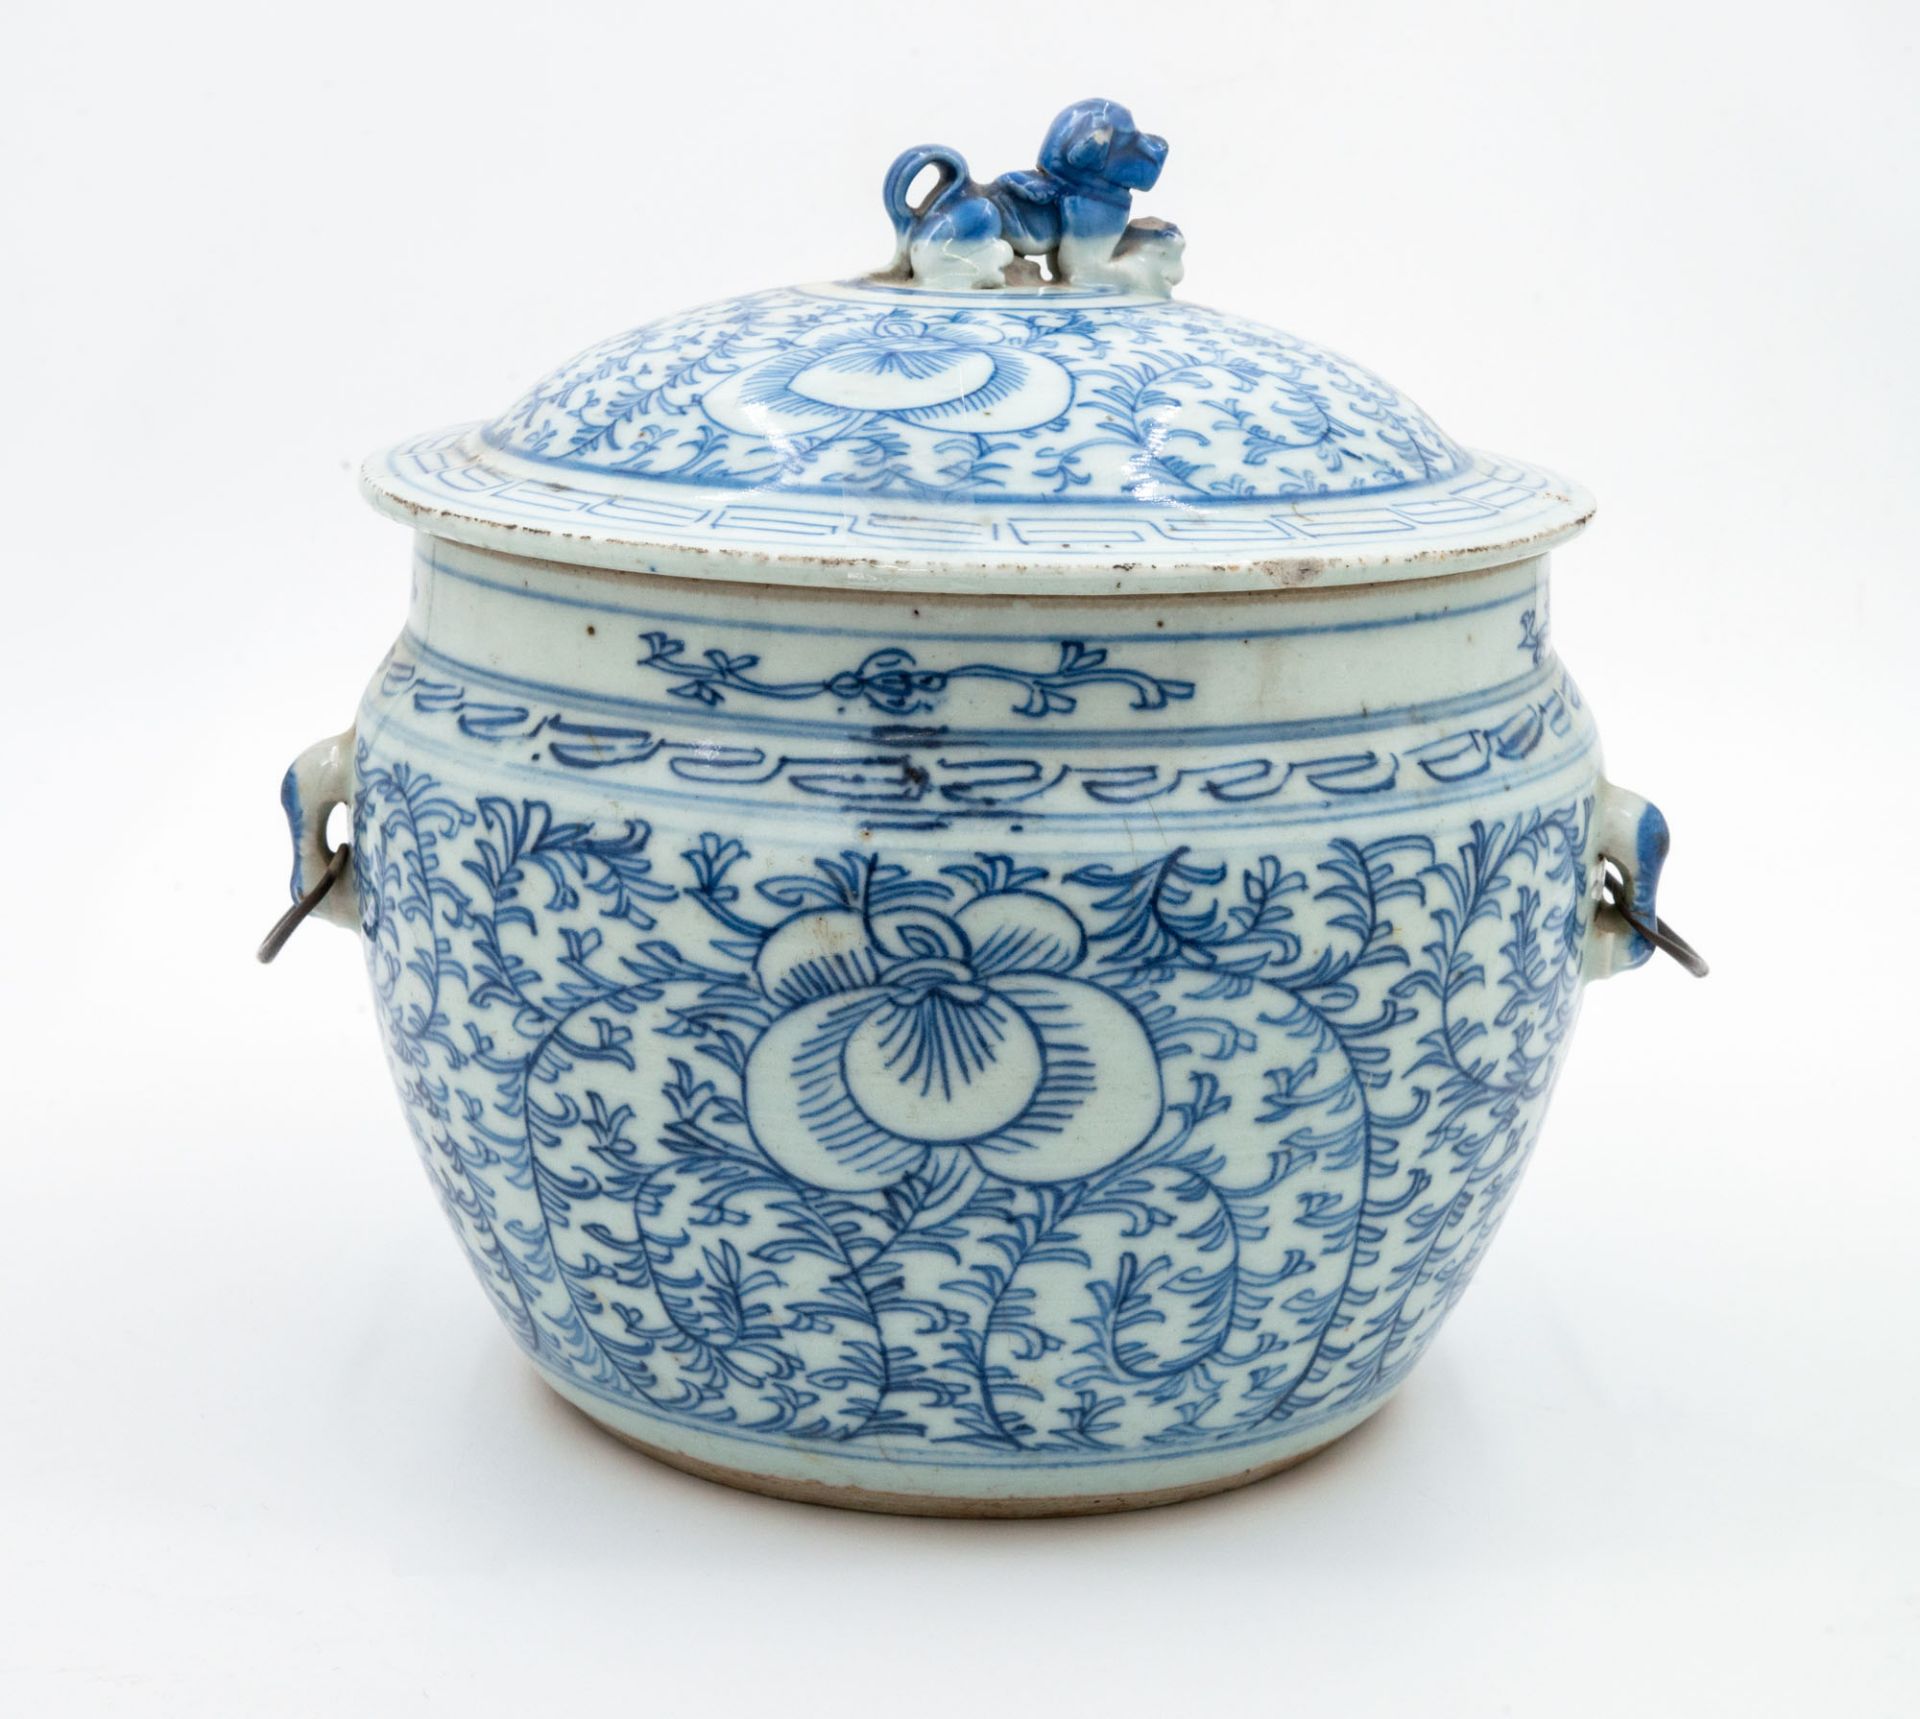 A Blue and White Porcelain Lidded Jar, China, Qing Dynasty, 19th Century - Image 3 of 8